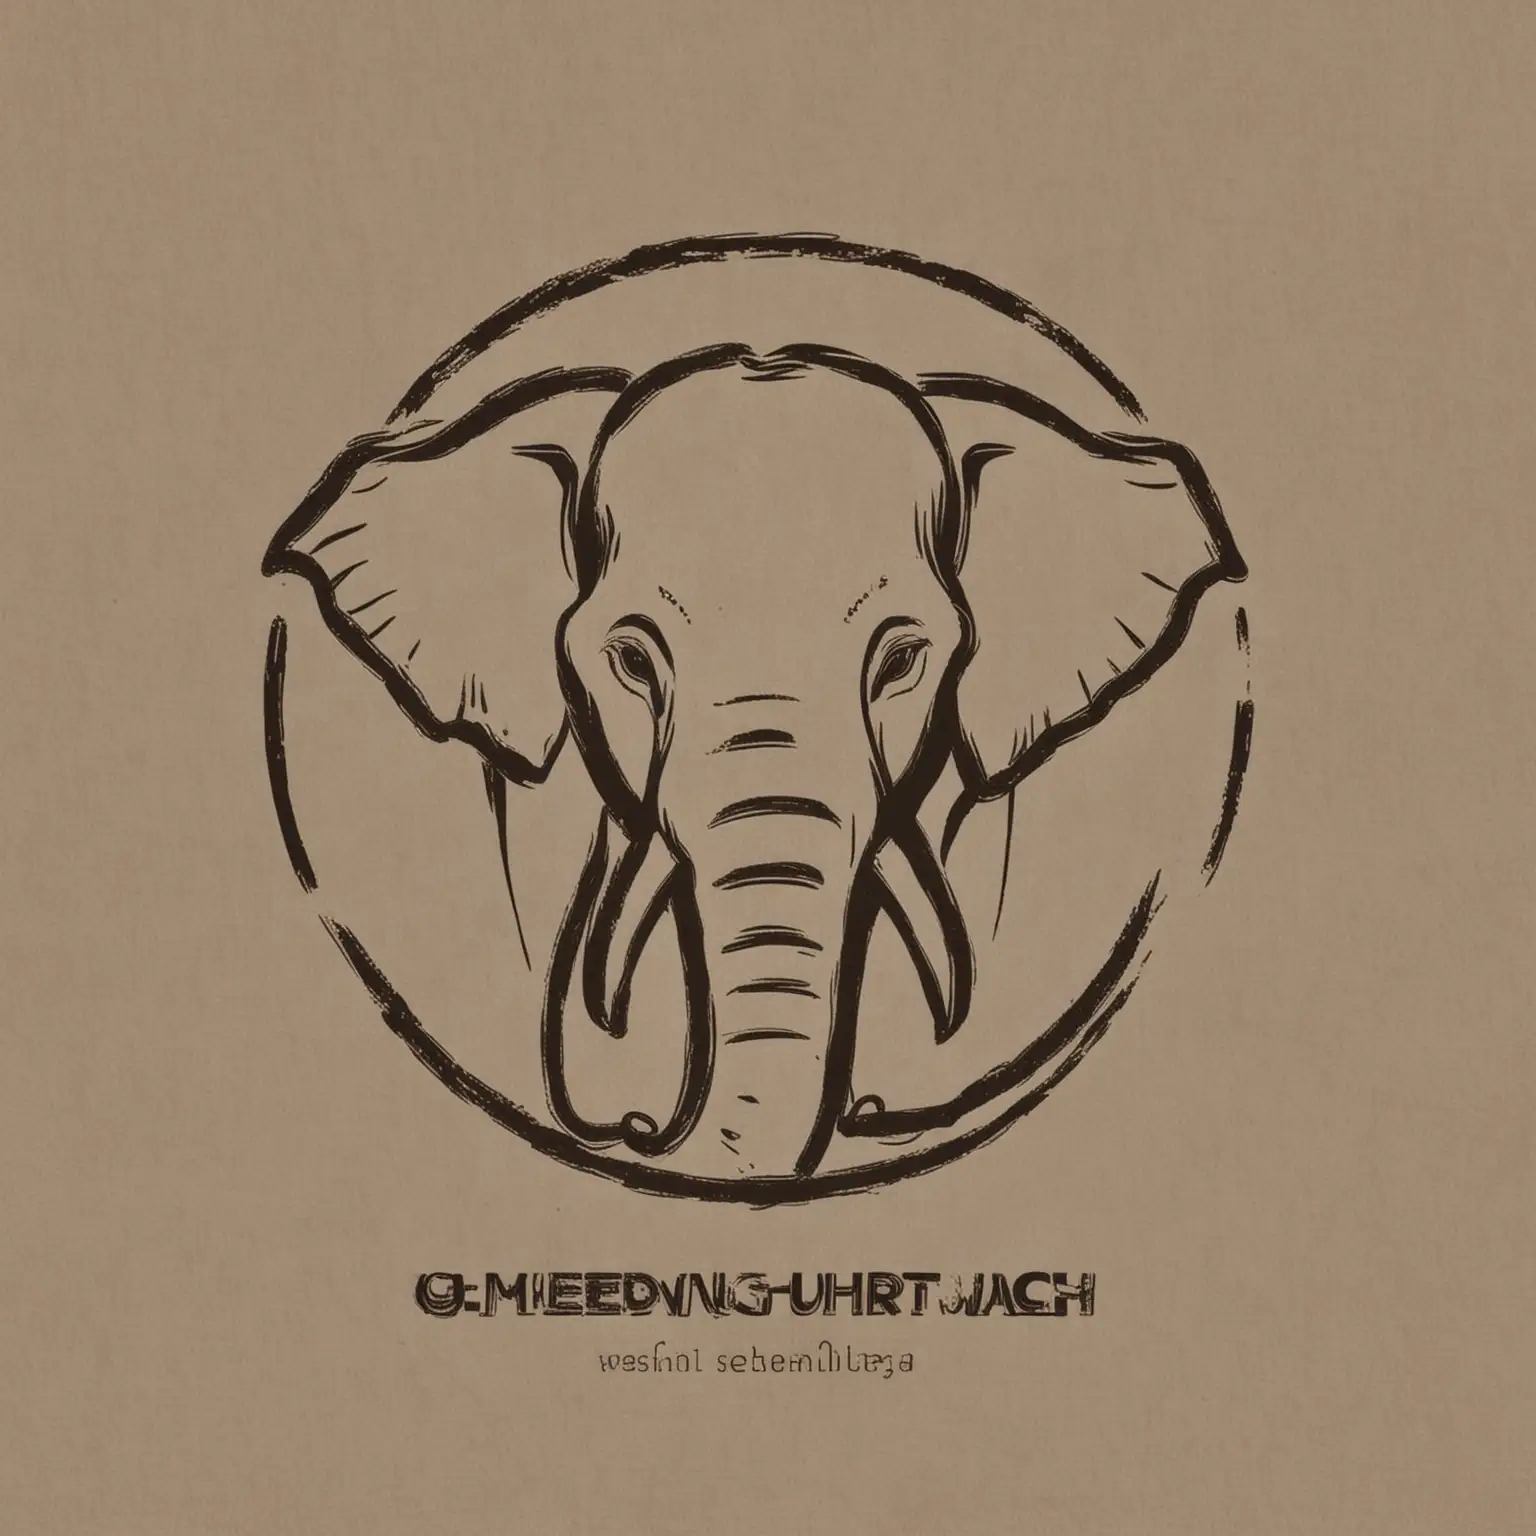 This simple line logo's theme image is an elephant, aiming to present power, stability and wisdom. It uses simple lines to draw the outline of an elephant, highlighting its solemn and elegant shape. Elephants symbolize long life, wisdom and power, and have important symbolic meanings in Indian culture. This logo will use clear lines to represent the image of an elephant, aiming to convey the brand's stable, reliable and elegant qualities.